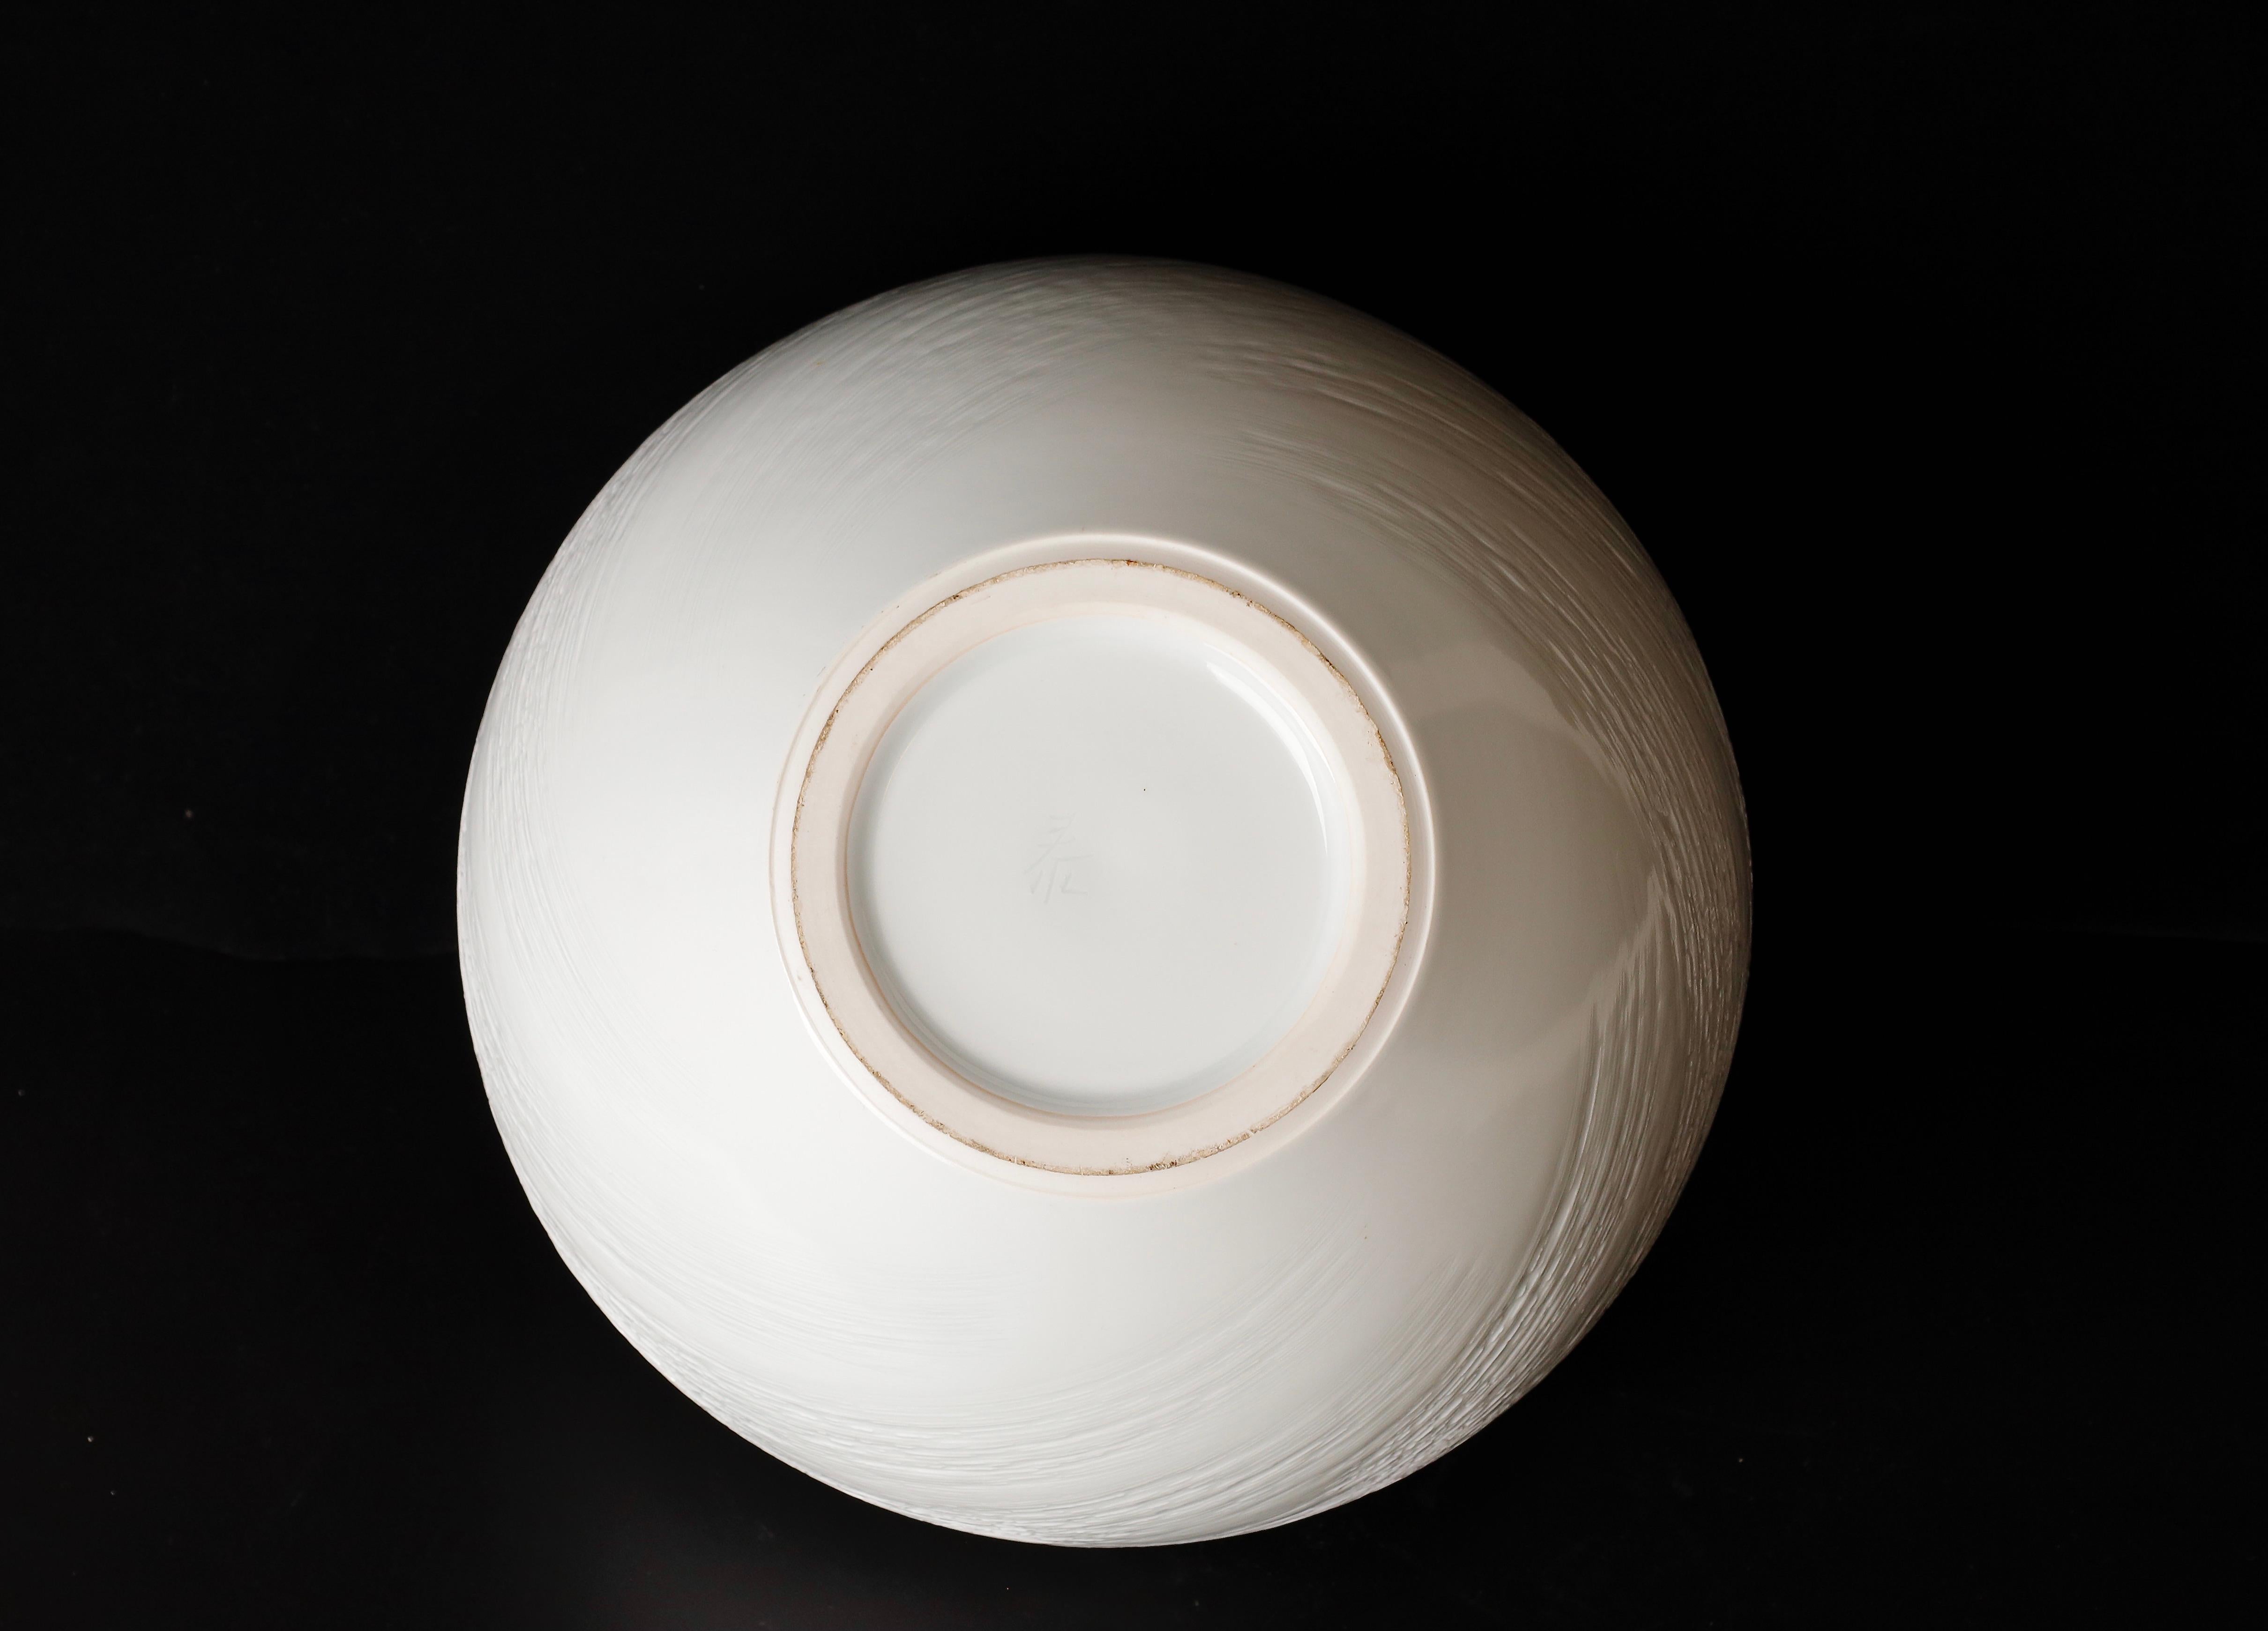 Exquisite Hand-Signed Arita Porcelain Vase, Contemporary Masterpiece by Yasushi For Sale 3